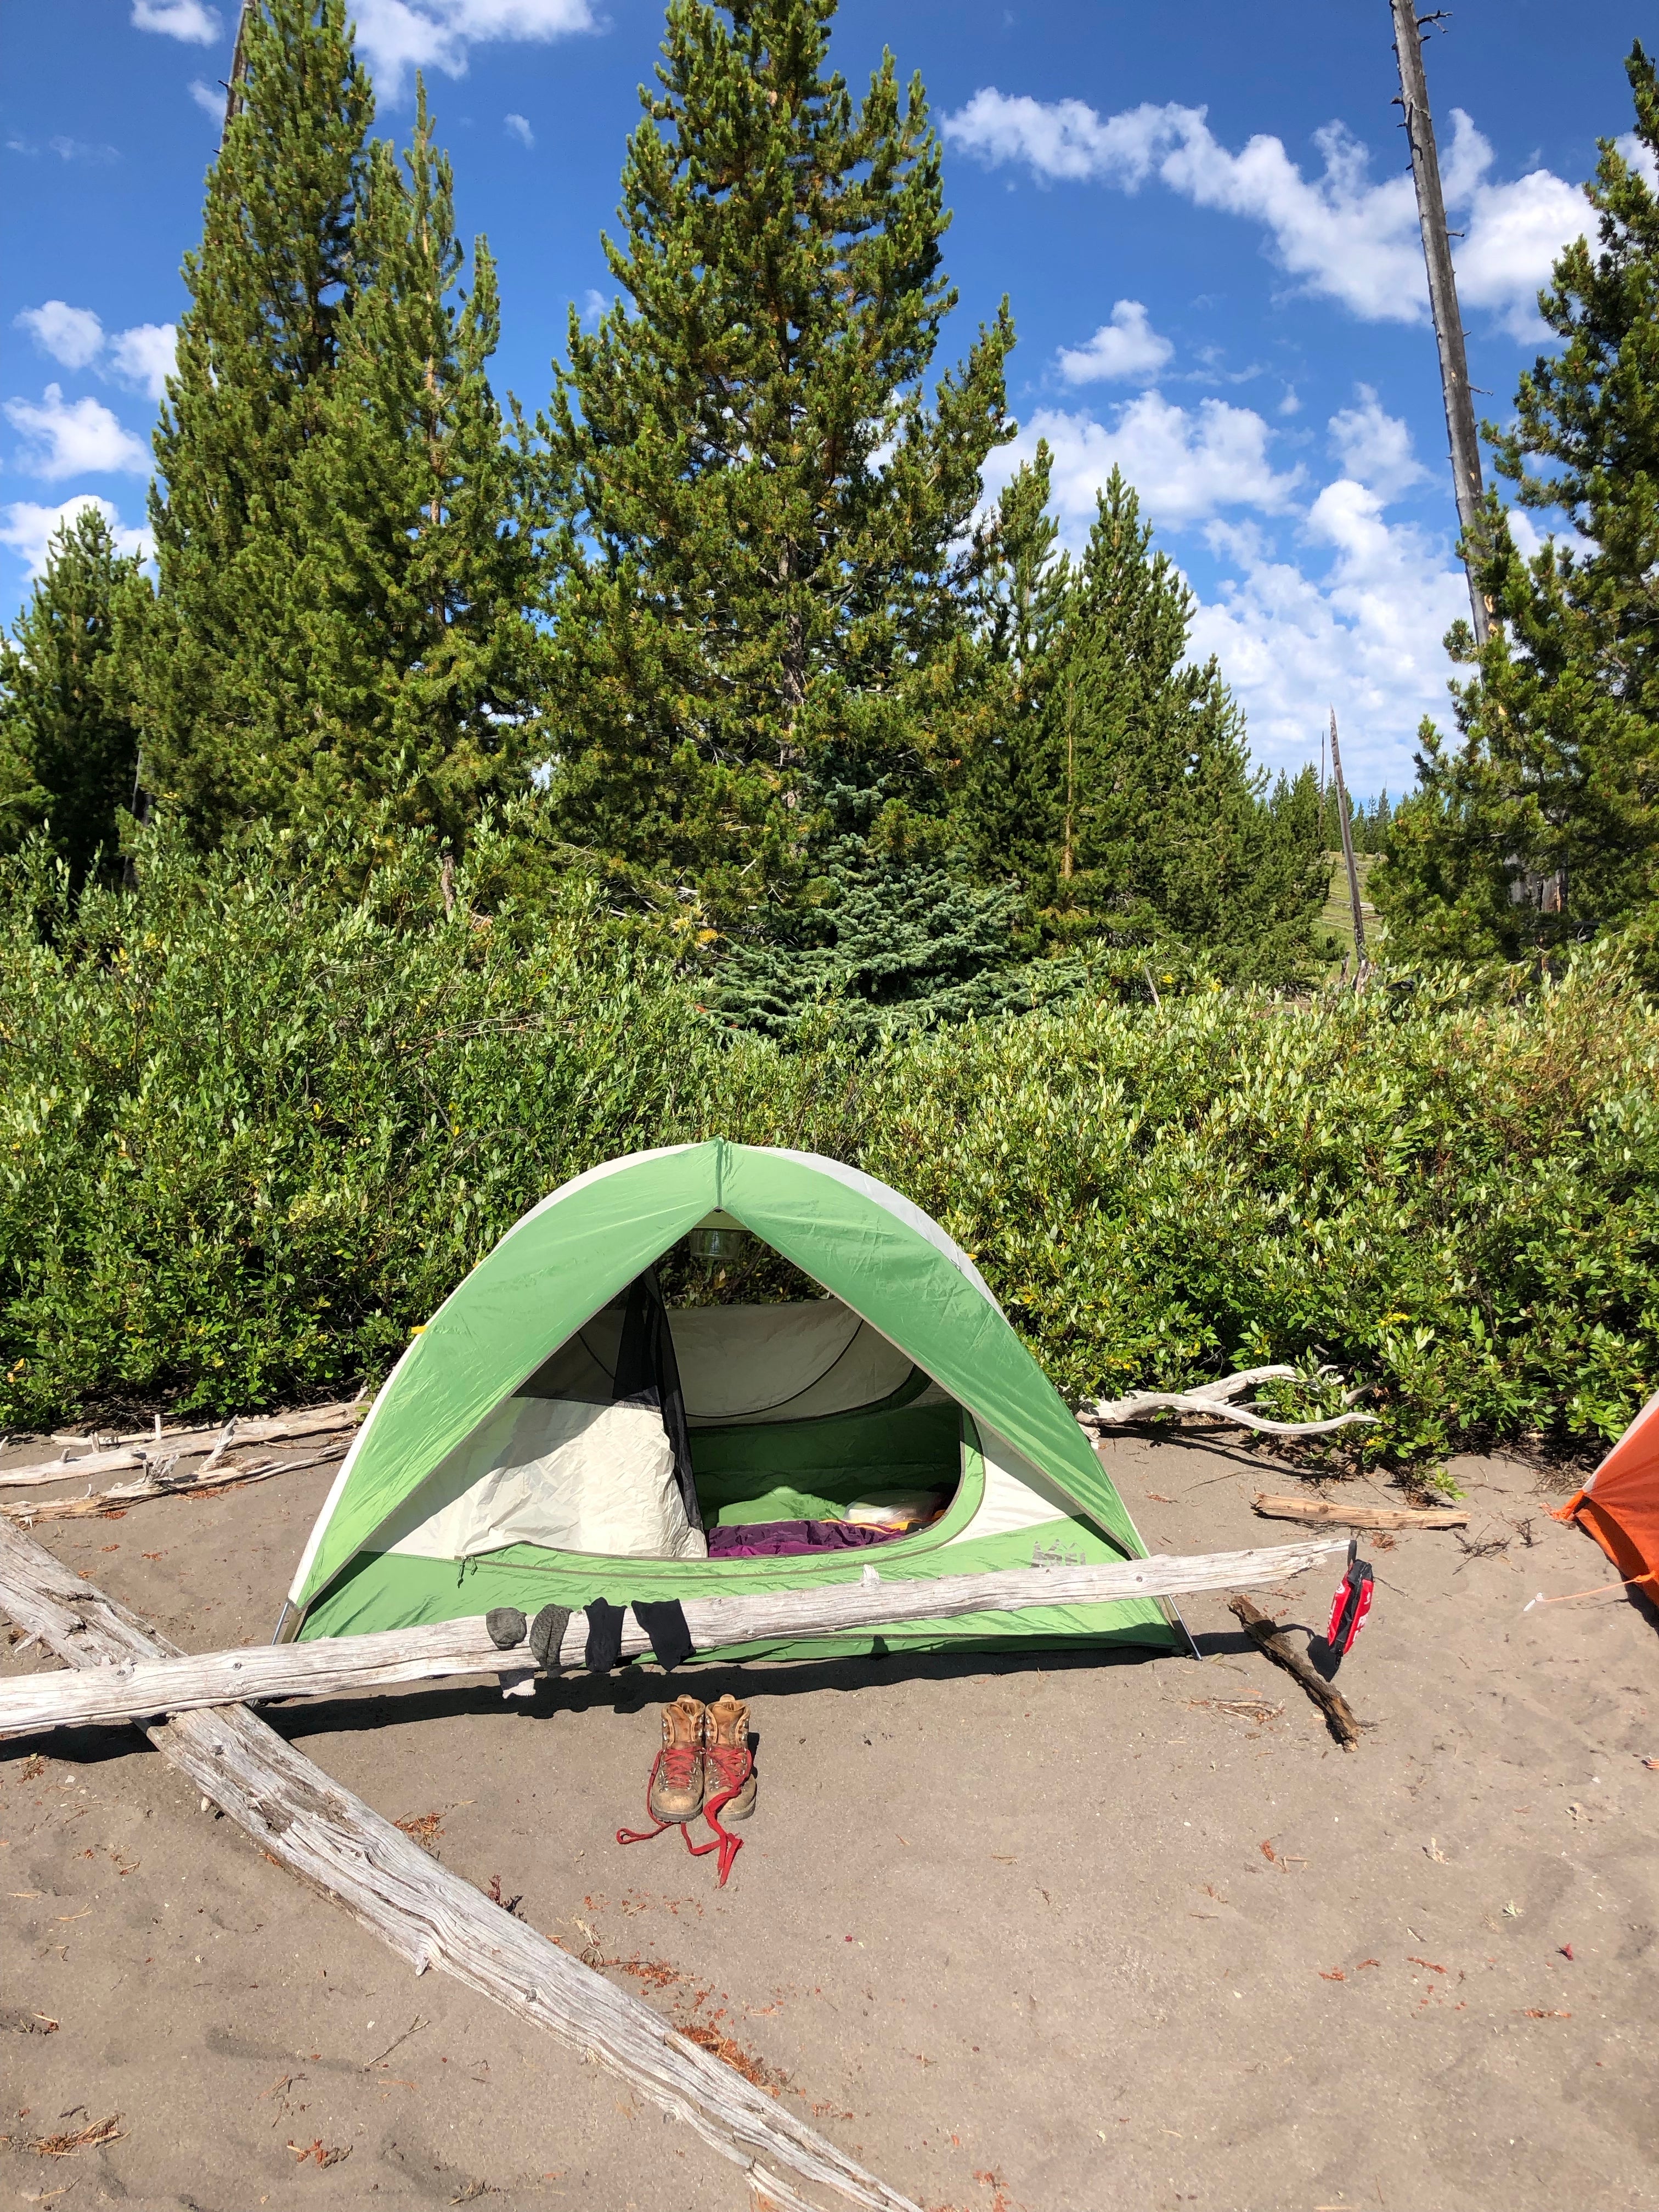 Camper submitted image from Yellowstone Lake — Yellowstone National Park - 2